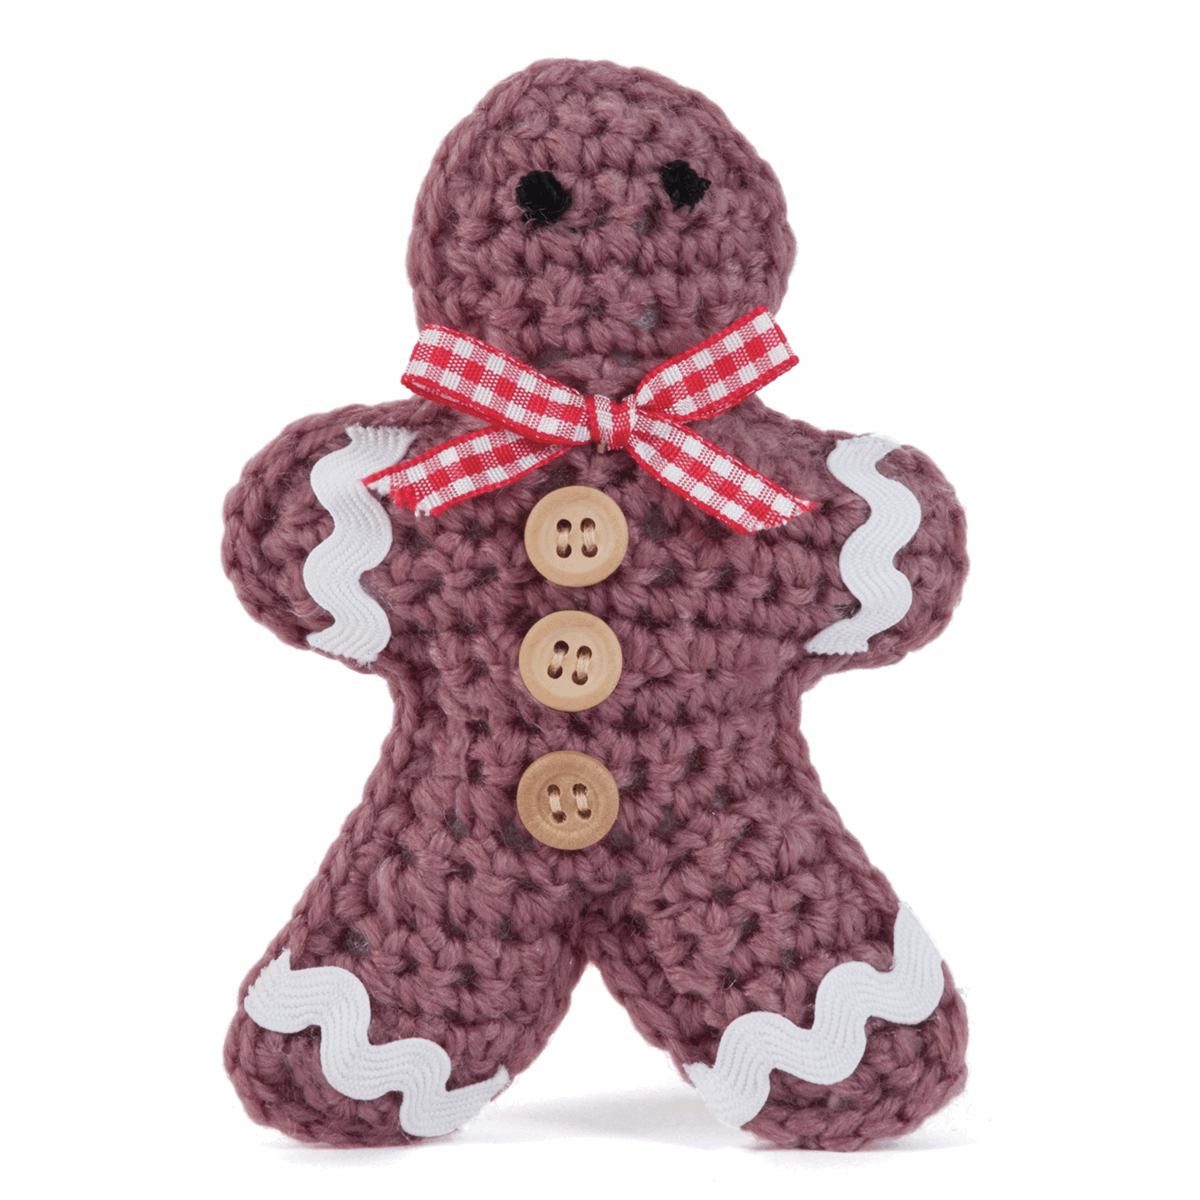 Make your own - Crochet Gingerbread Man Decoration